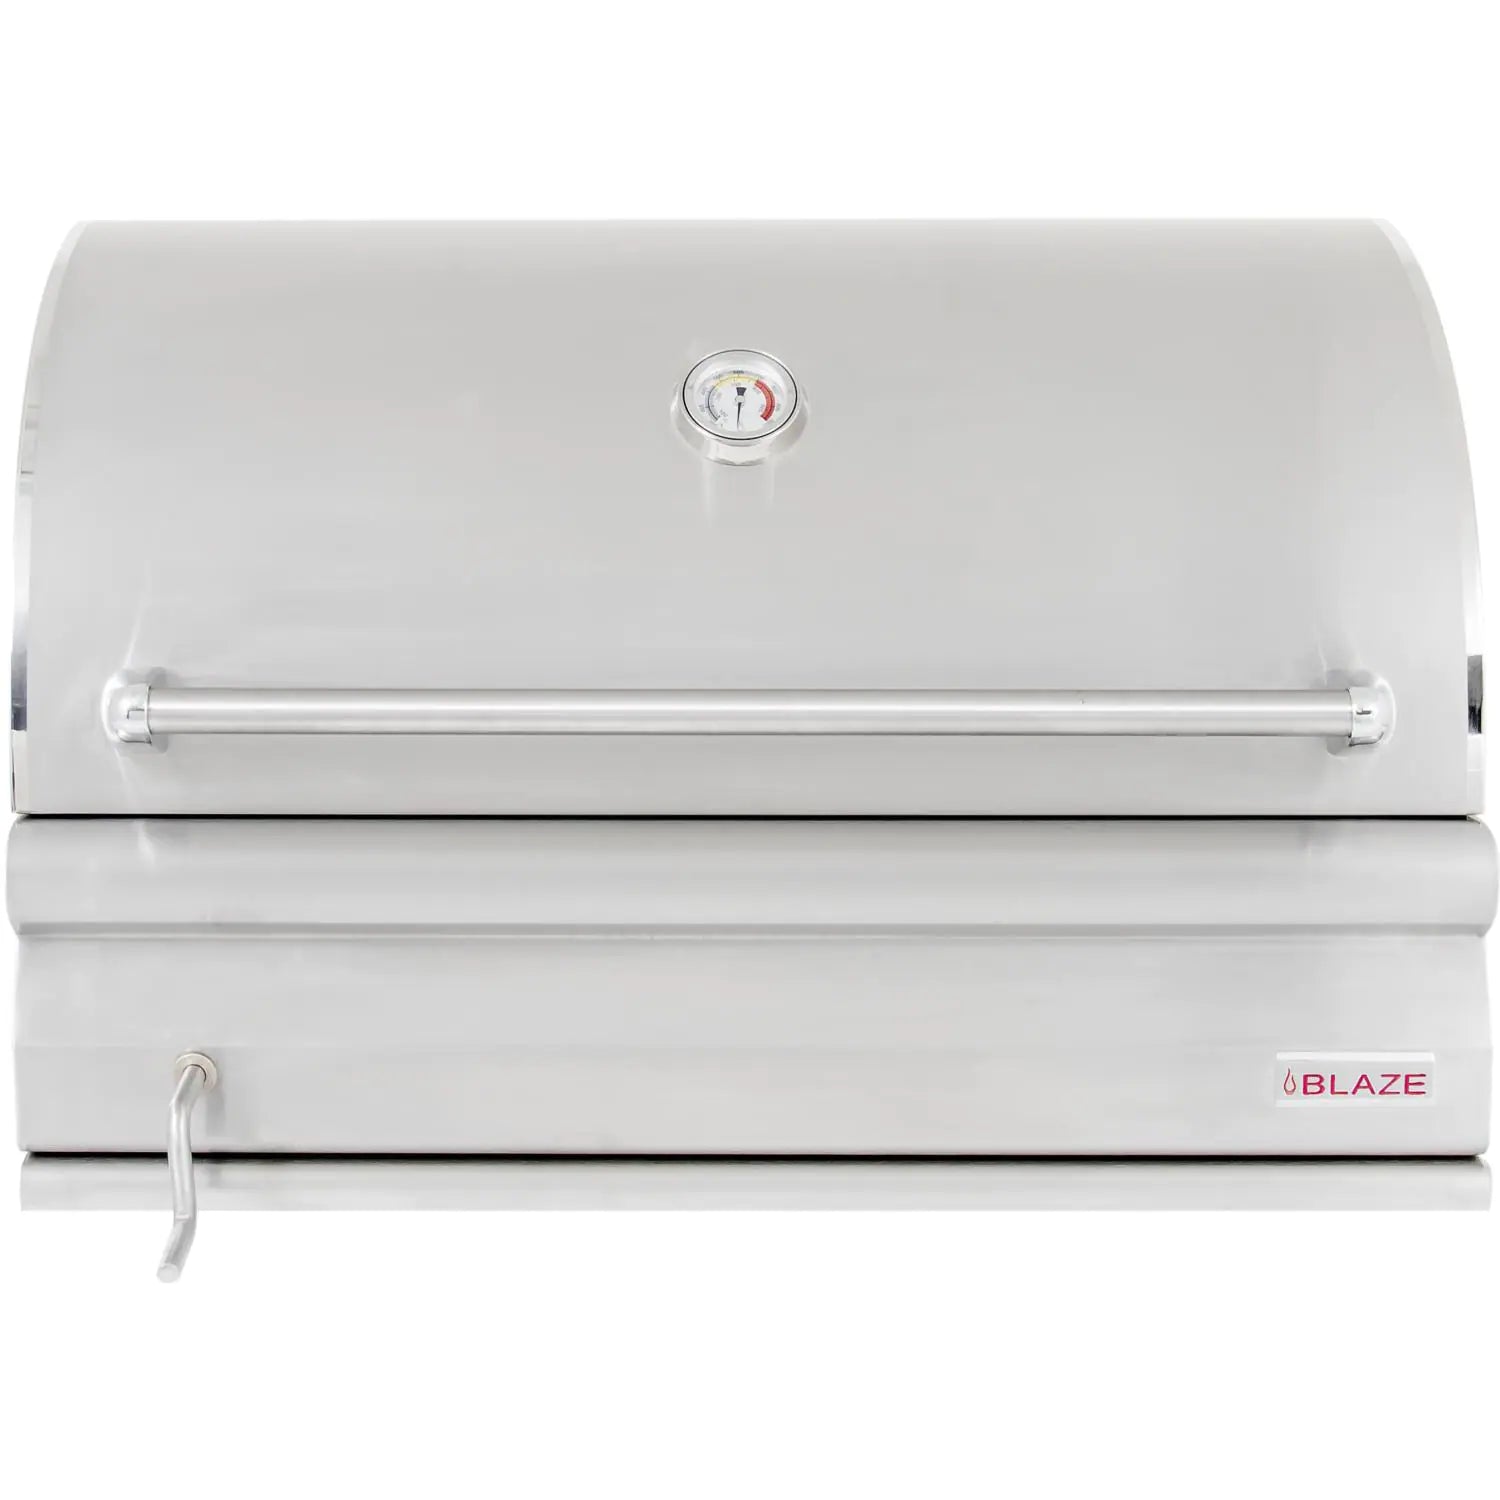 Blaze 32-Inch Built-In Stainless Steel Charcoal Grill With Adjustable Charcoal Tray - BLZ-4-CHAR - Grills N More